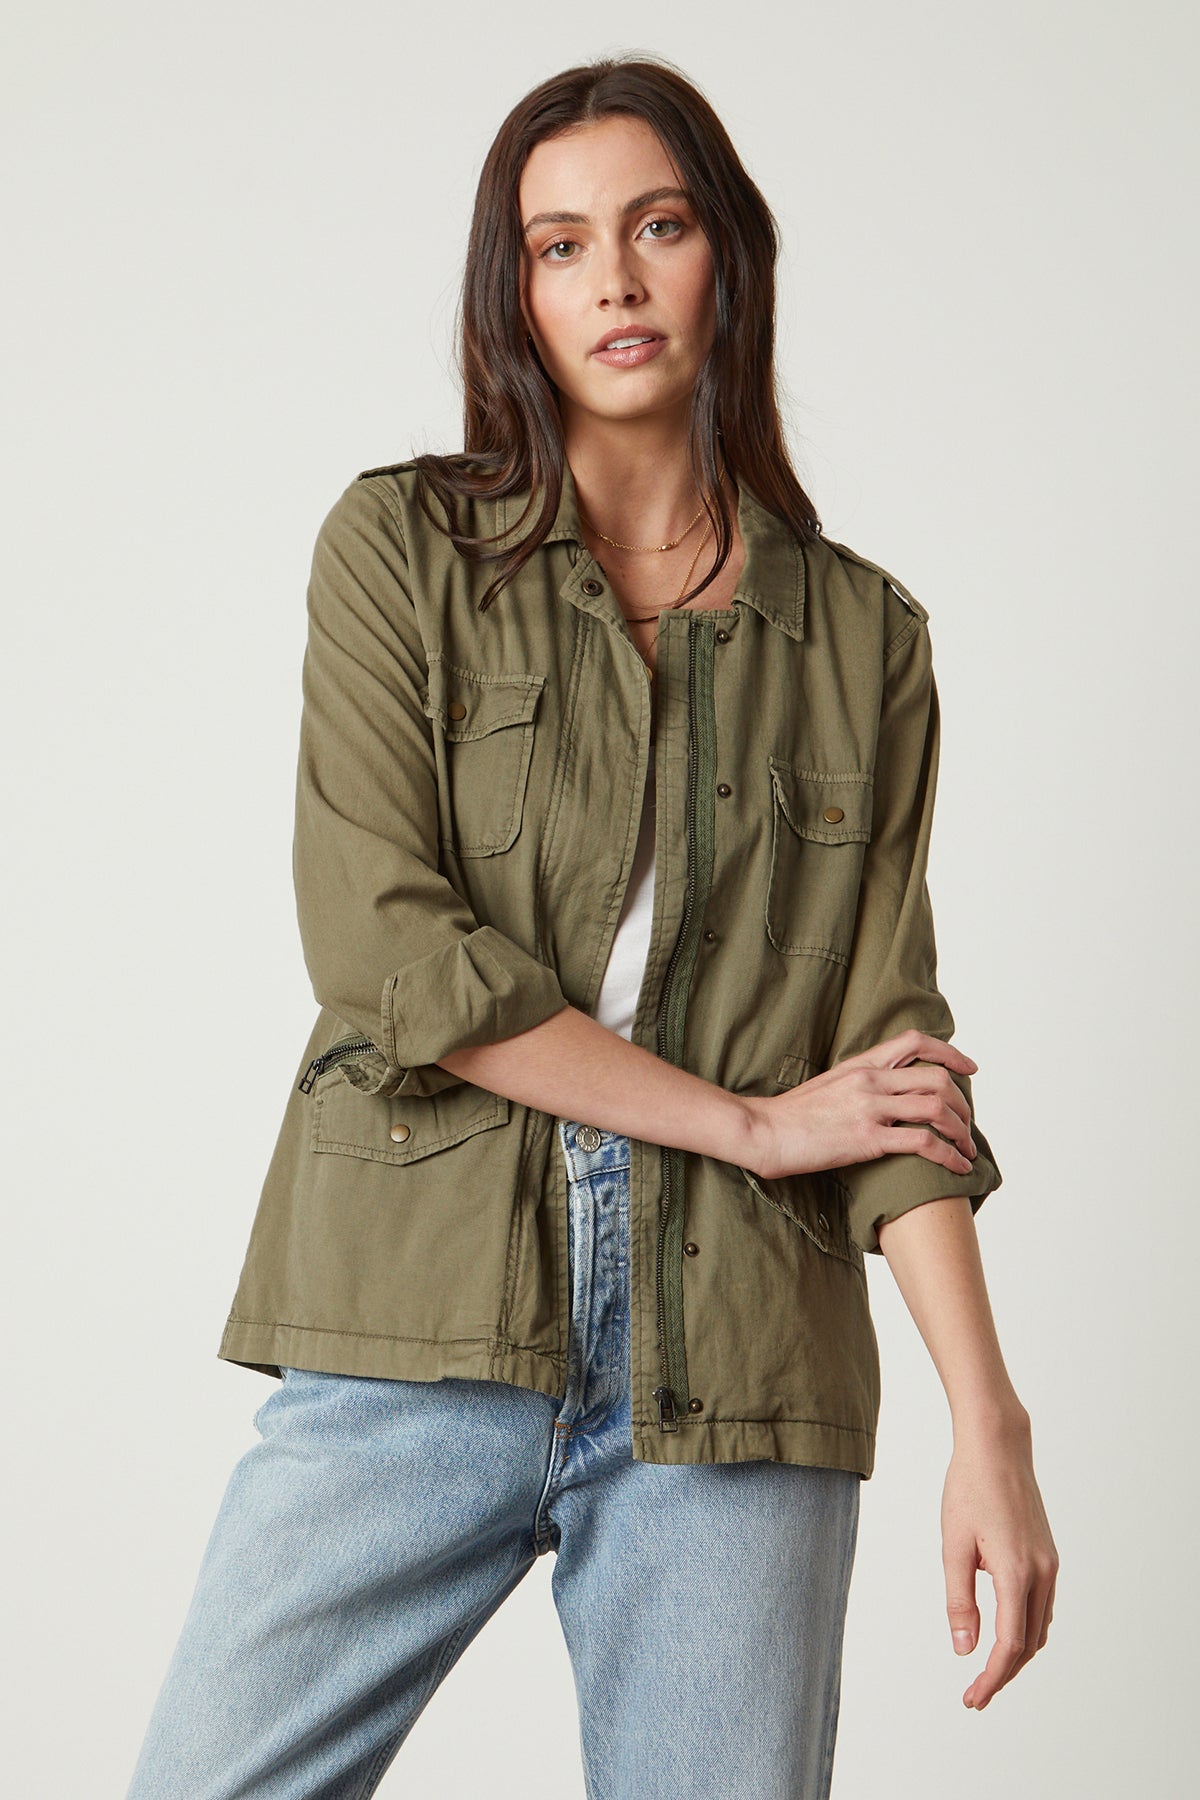   A woman wearing a RUBY LIGHT-WEIGHT ARMY JACKET, made by Velvet by Graham & Spencer, and jeans. 